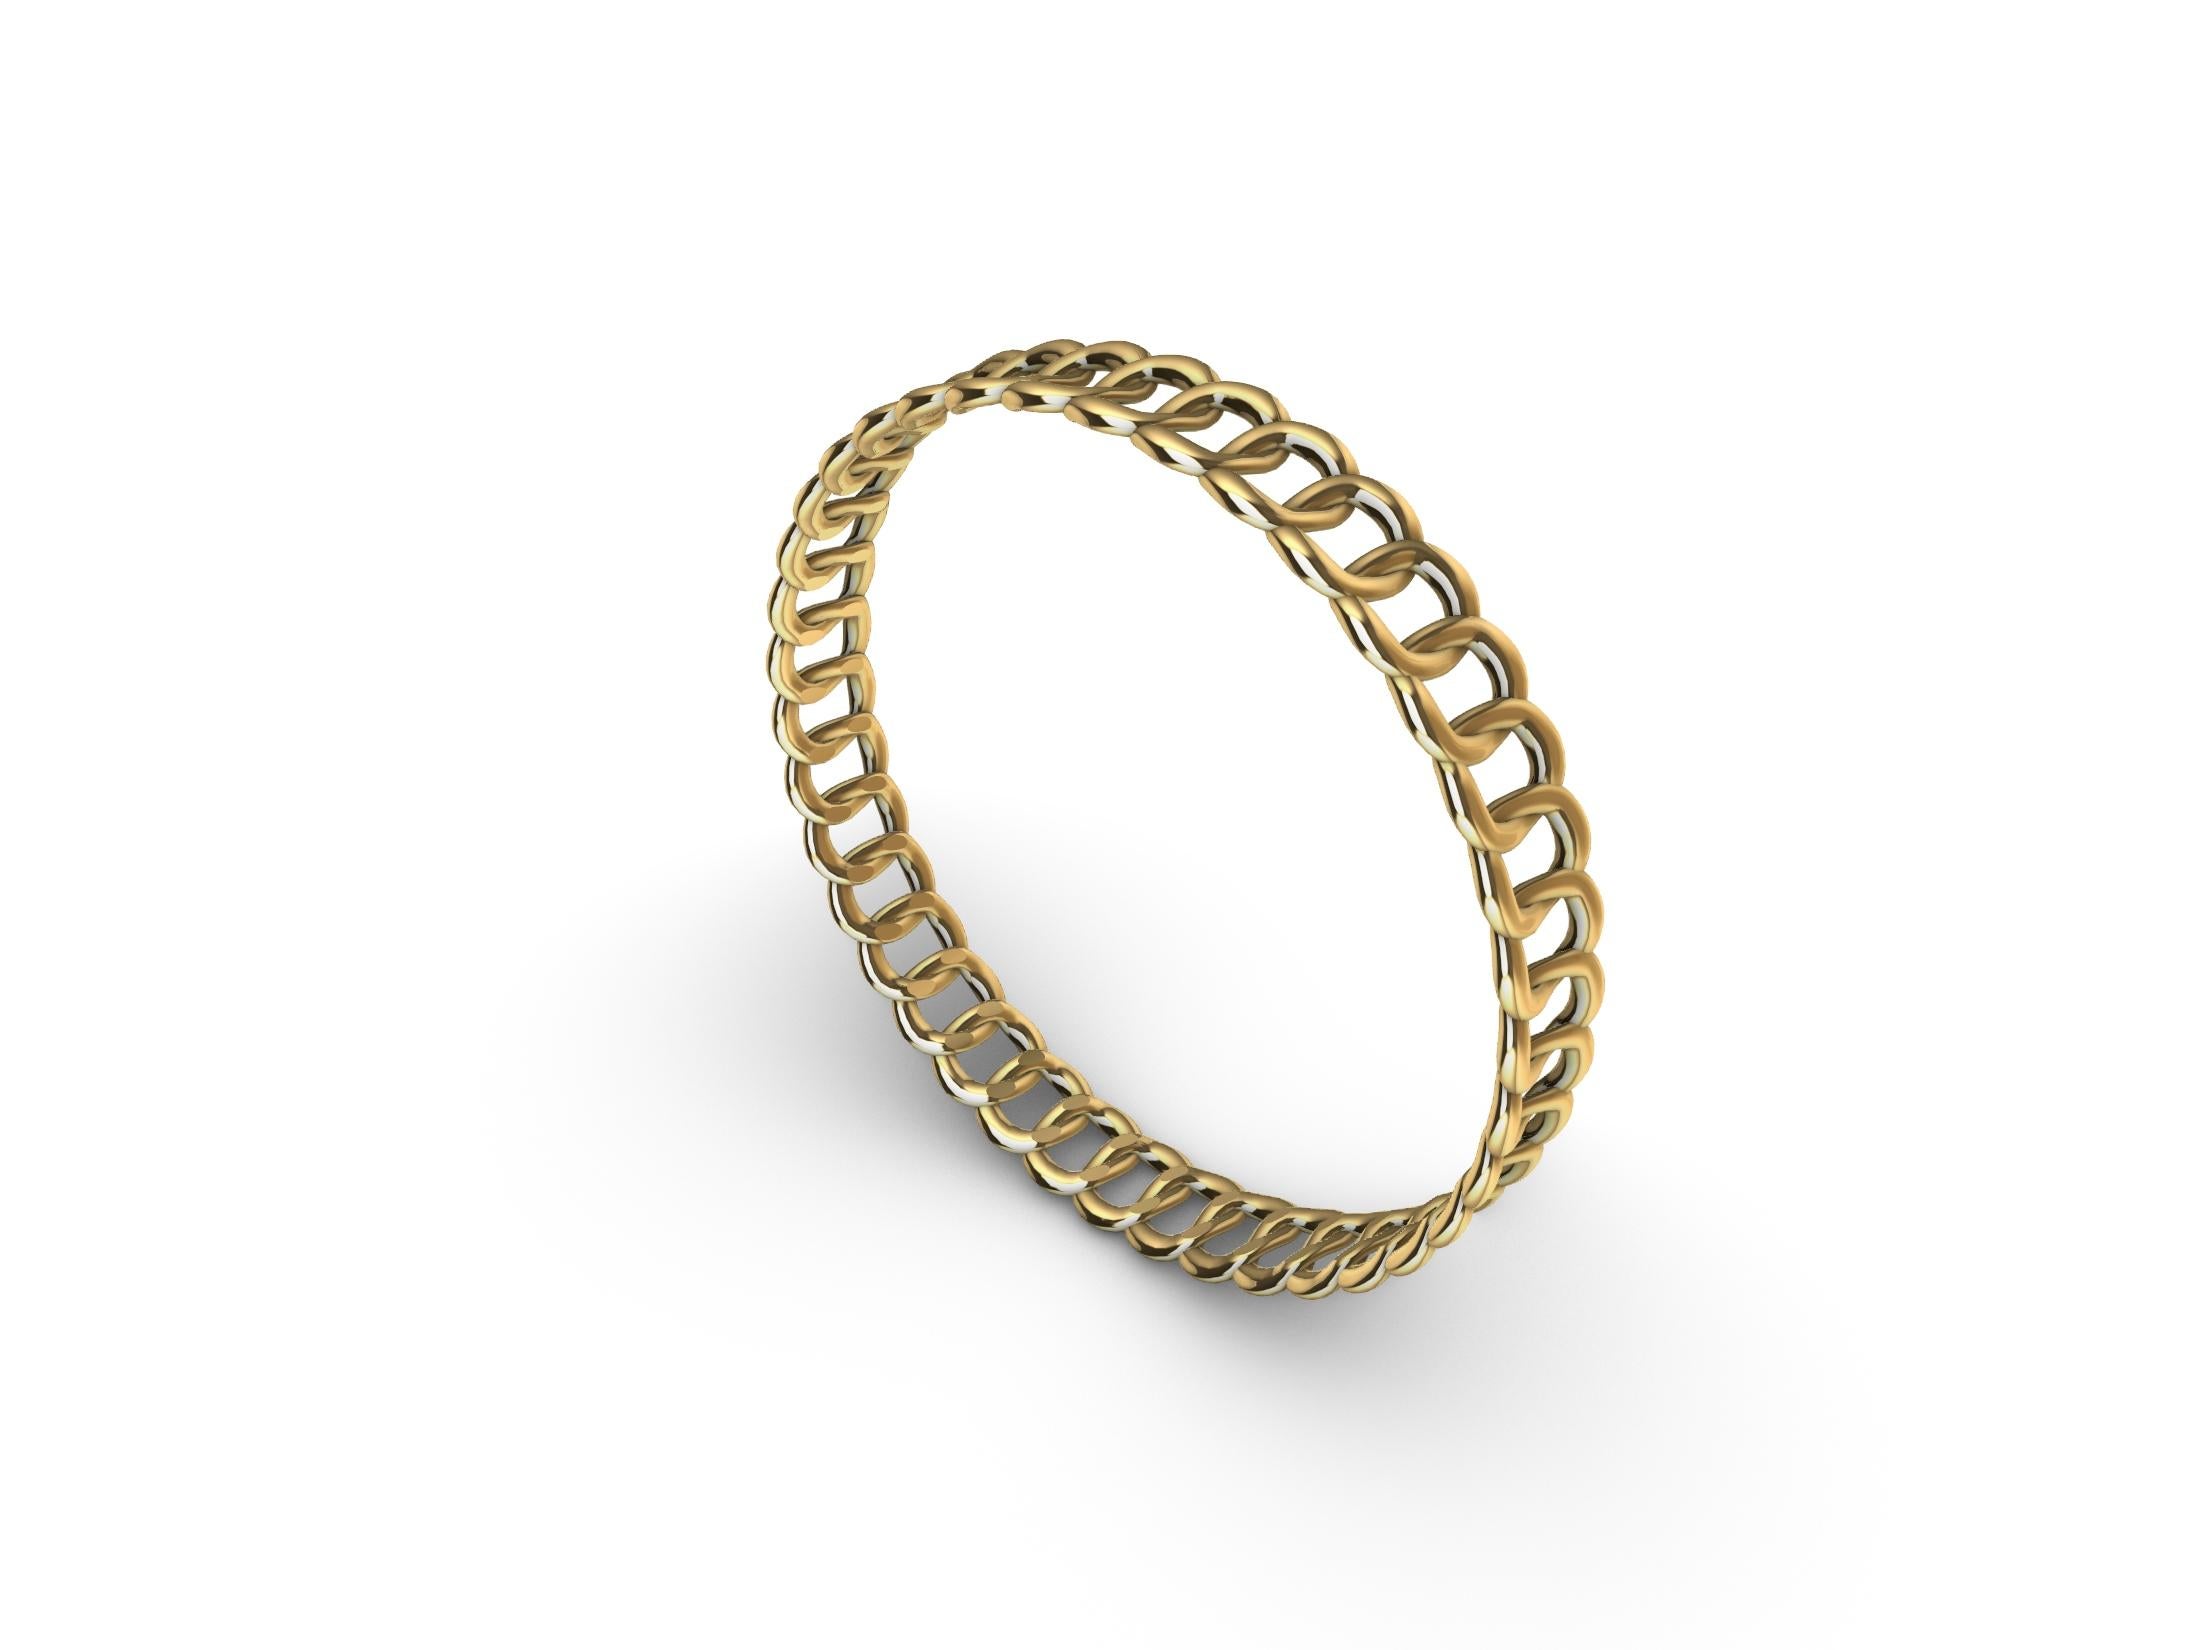 14 Karat Yellow  Gold Soft Curb Chain Bangle Bracelet, Tiffany designer, Thomas Kurilla  9.5mm wide. Classic Cuban Curb chain . Matte or Polished. Can be made in 18k ,10k, ,5k.
  Made to order in NYC, please allow 3-4  weeks.